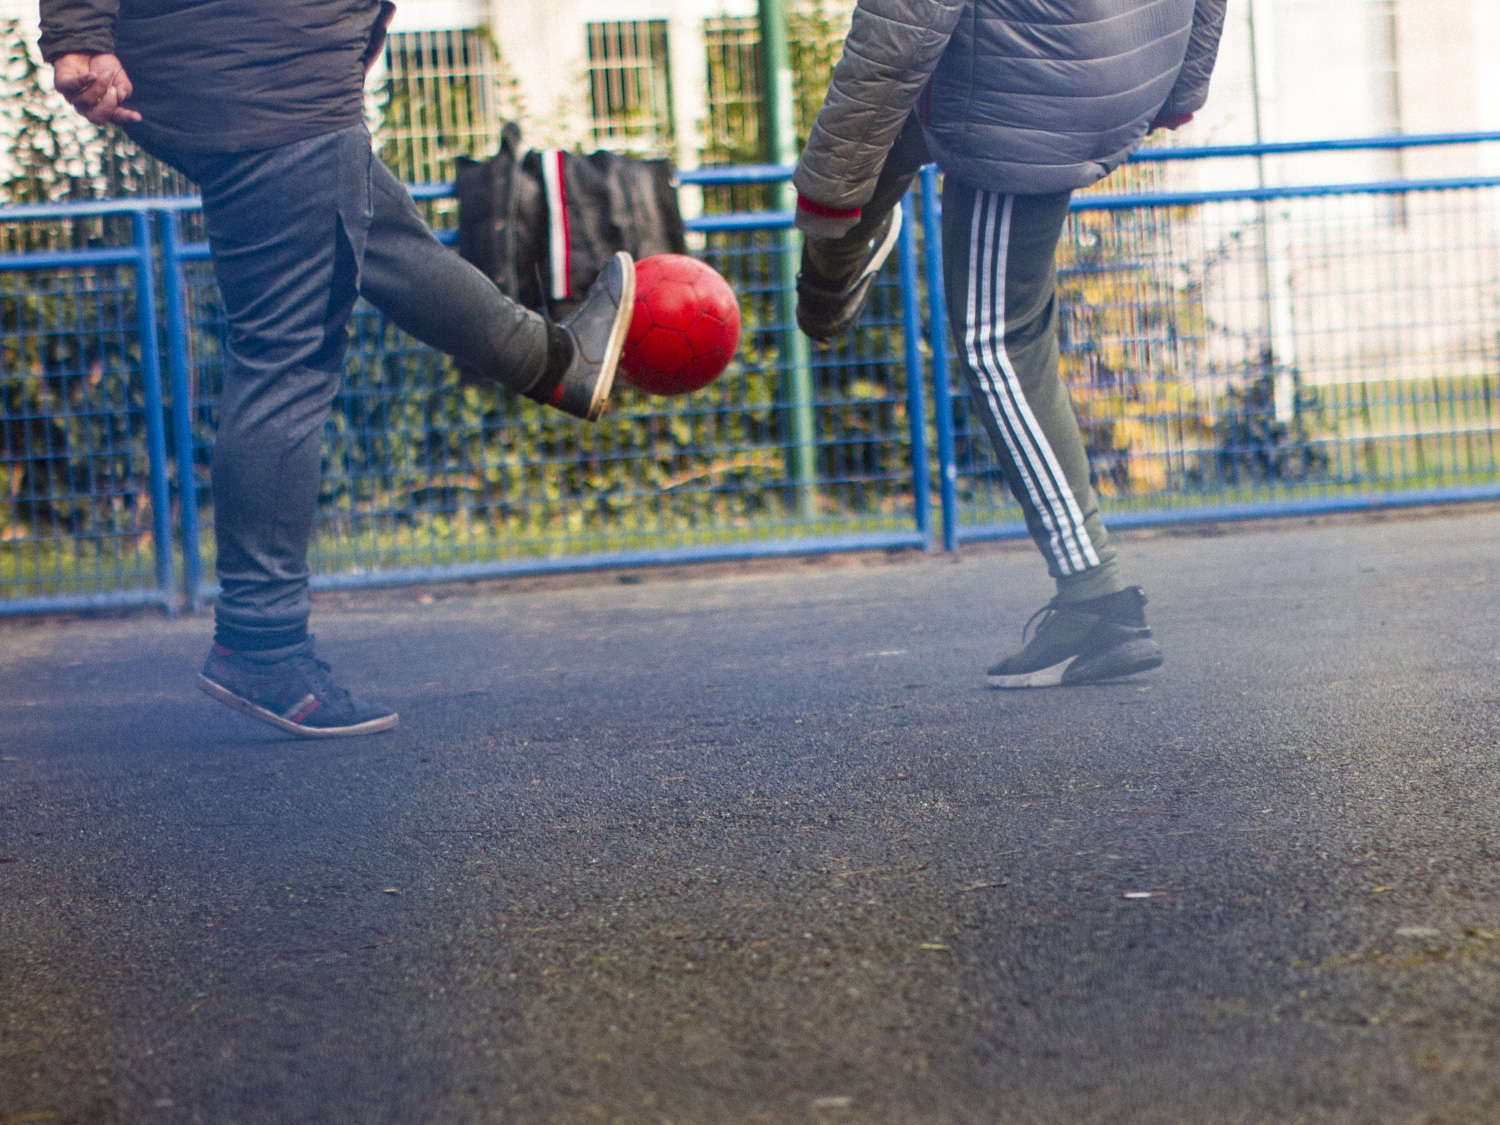 Two boys kicking a football in a playground